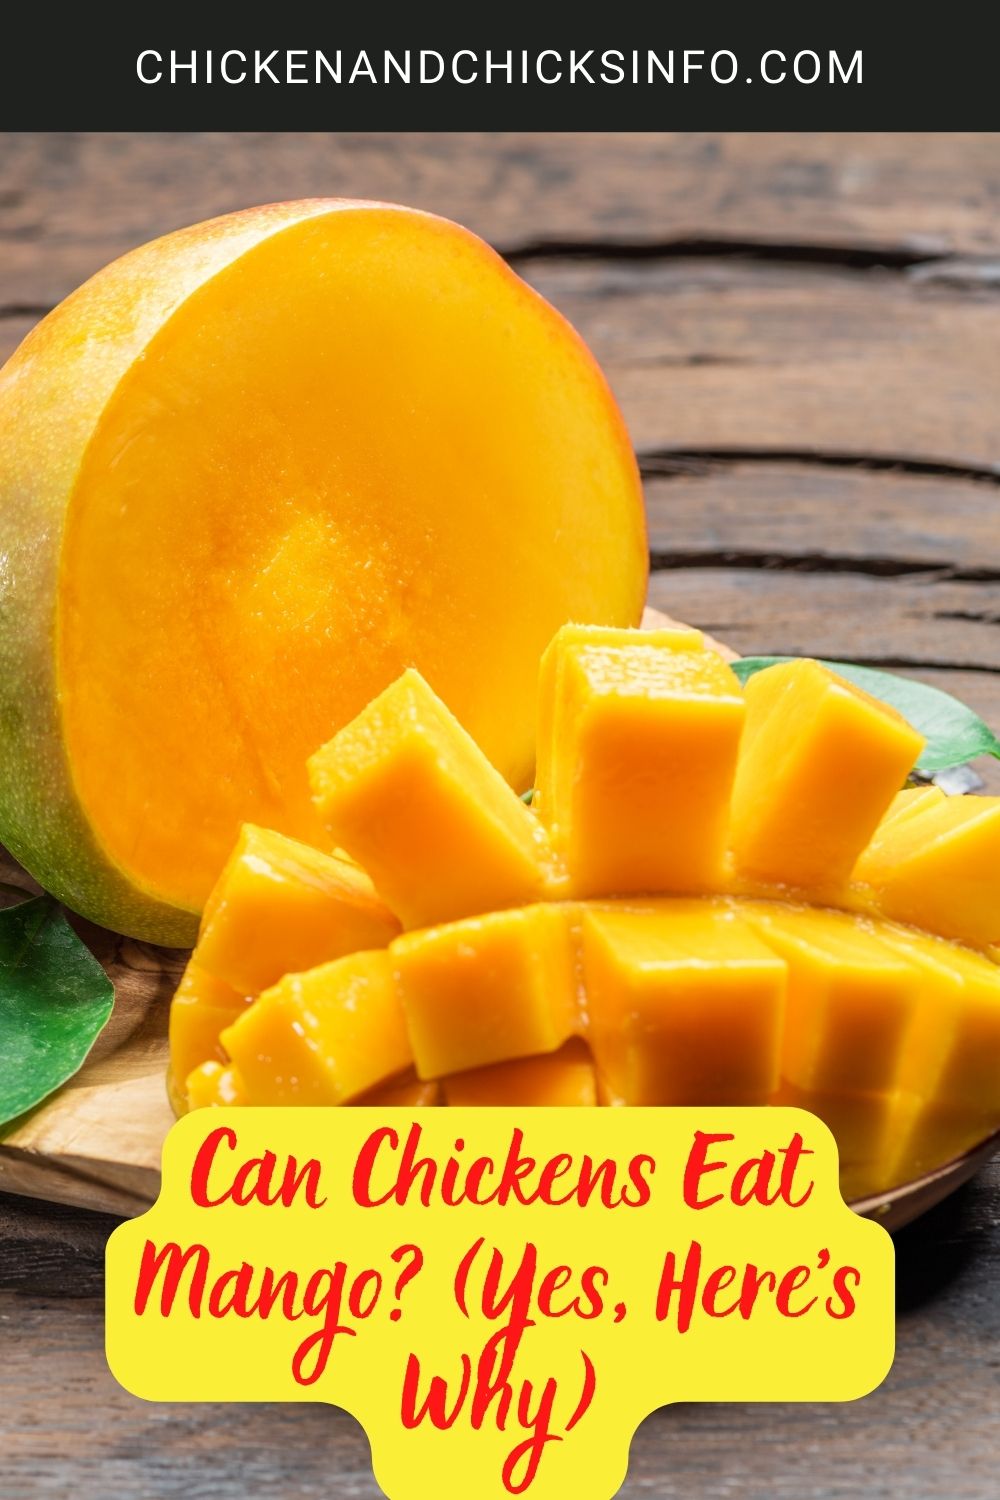 Can Chickens Eat Mango? (Yes, Here's Why) poster.
